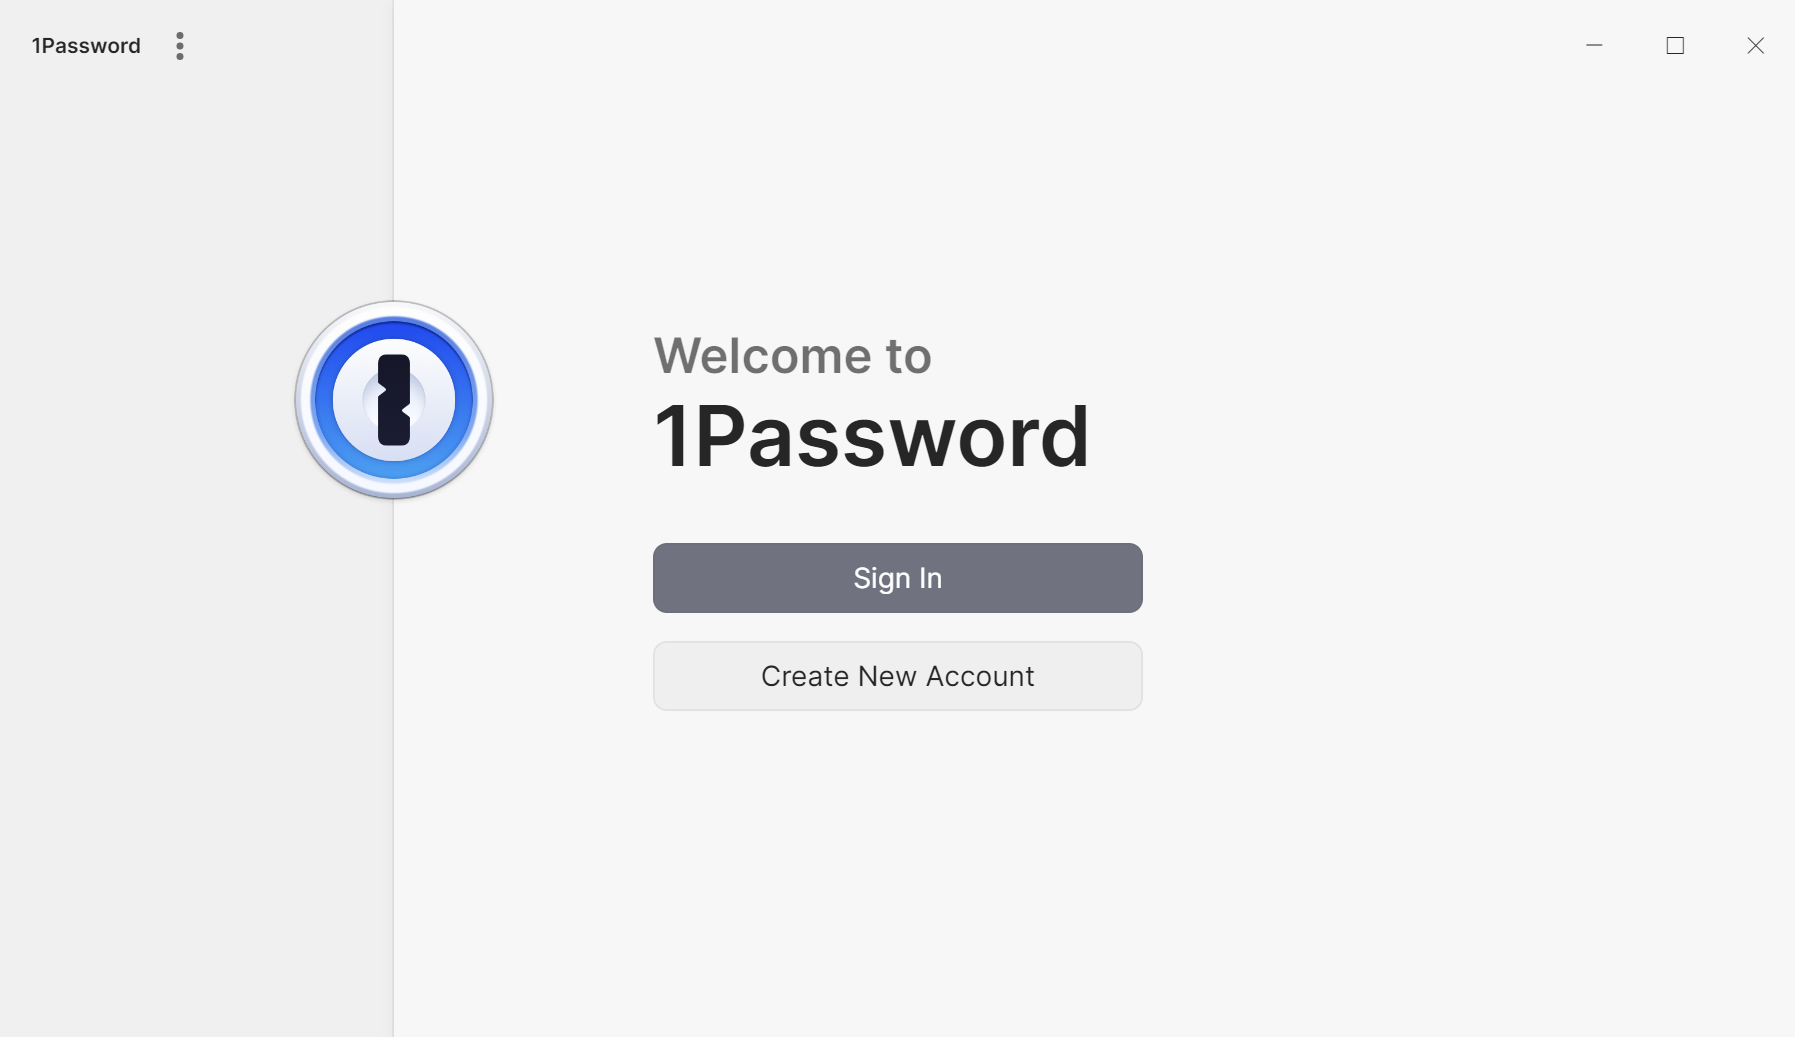 1Password plans to become the first password manager without a password